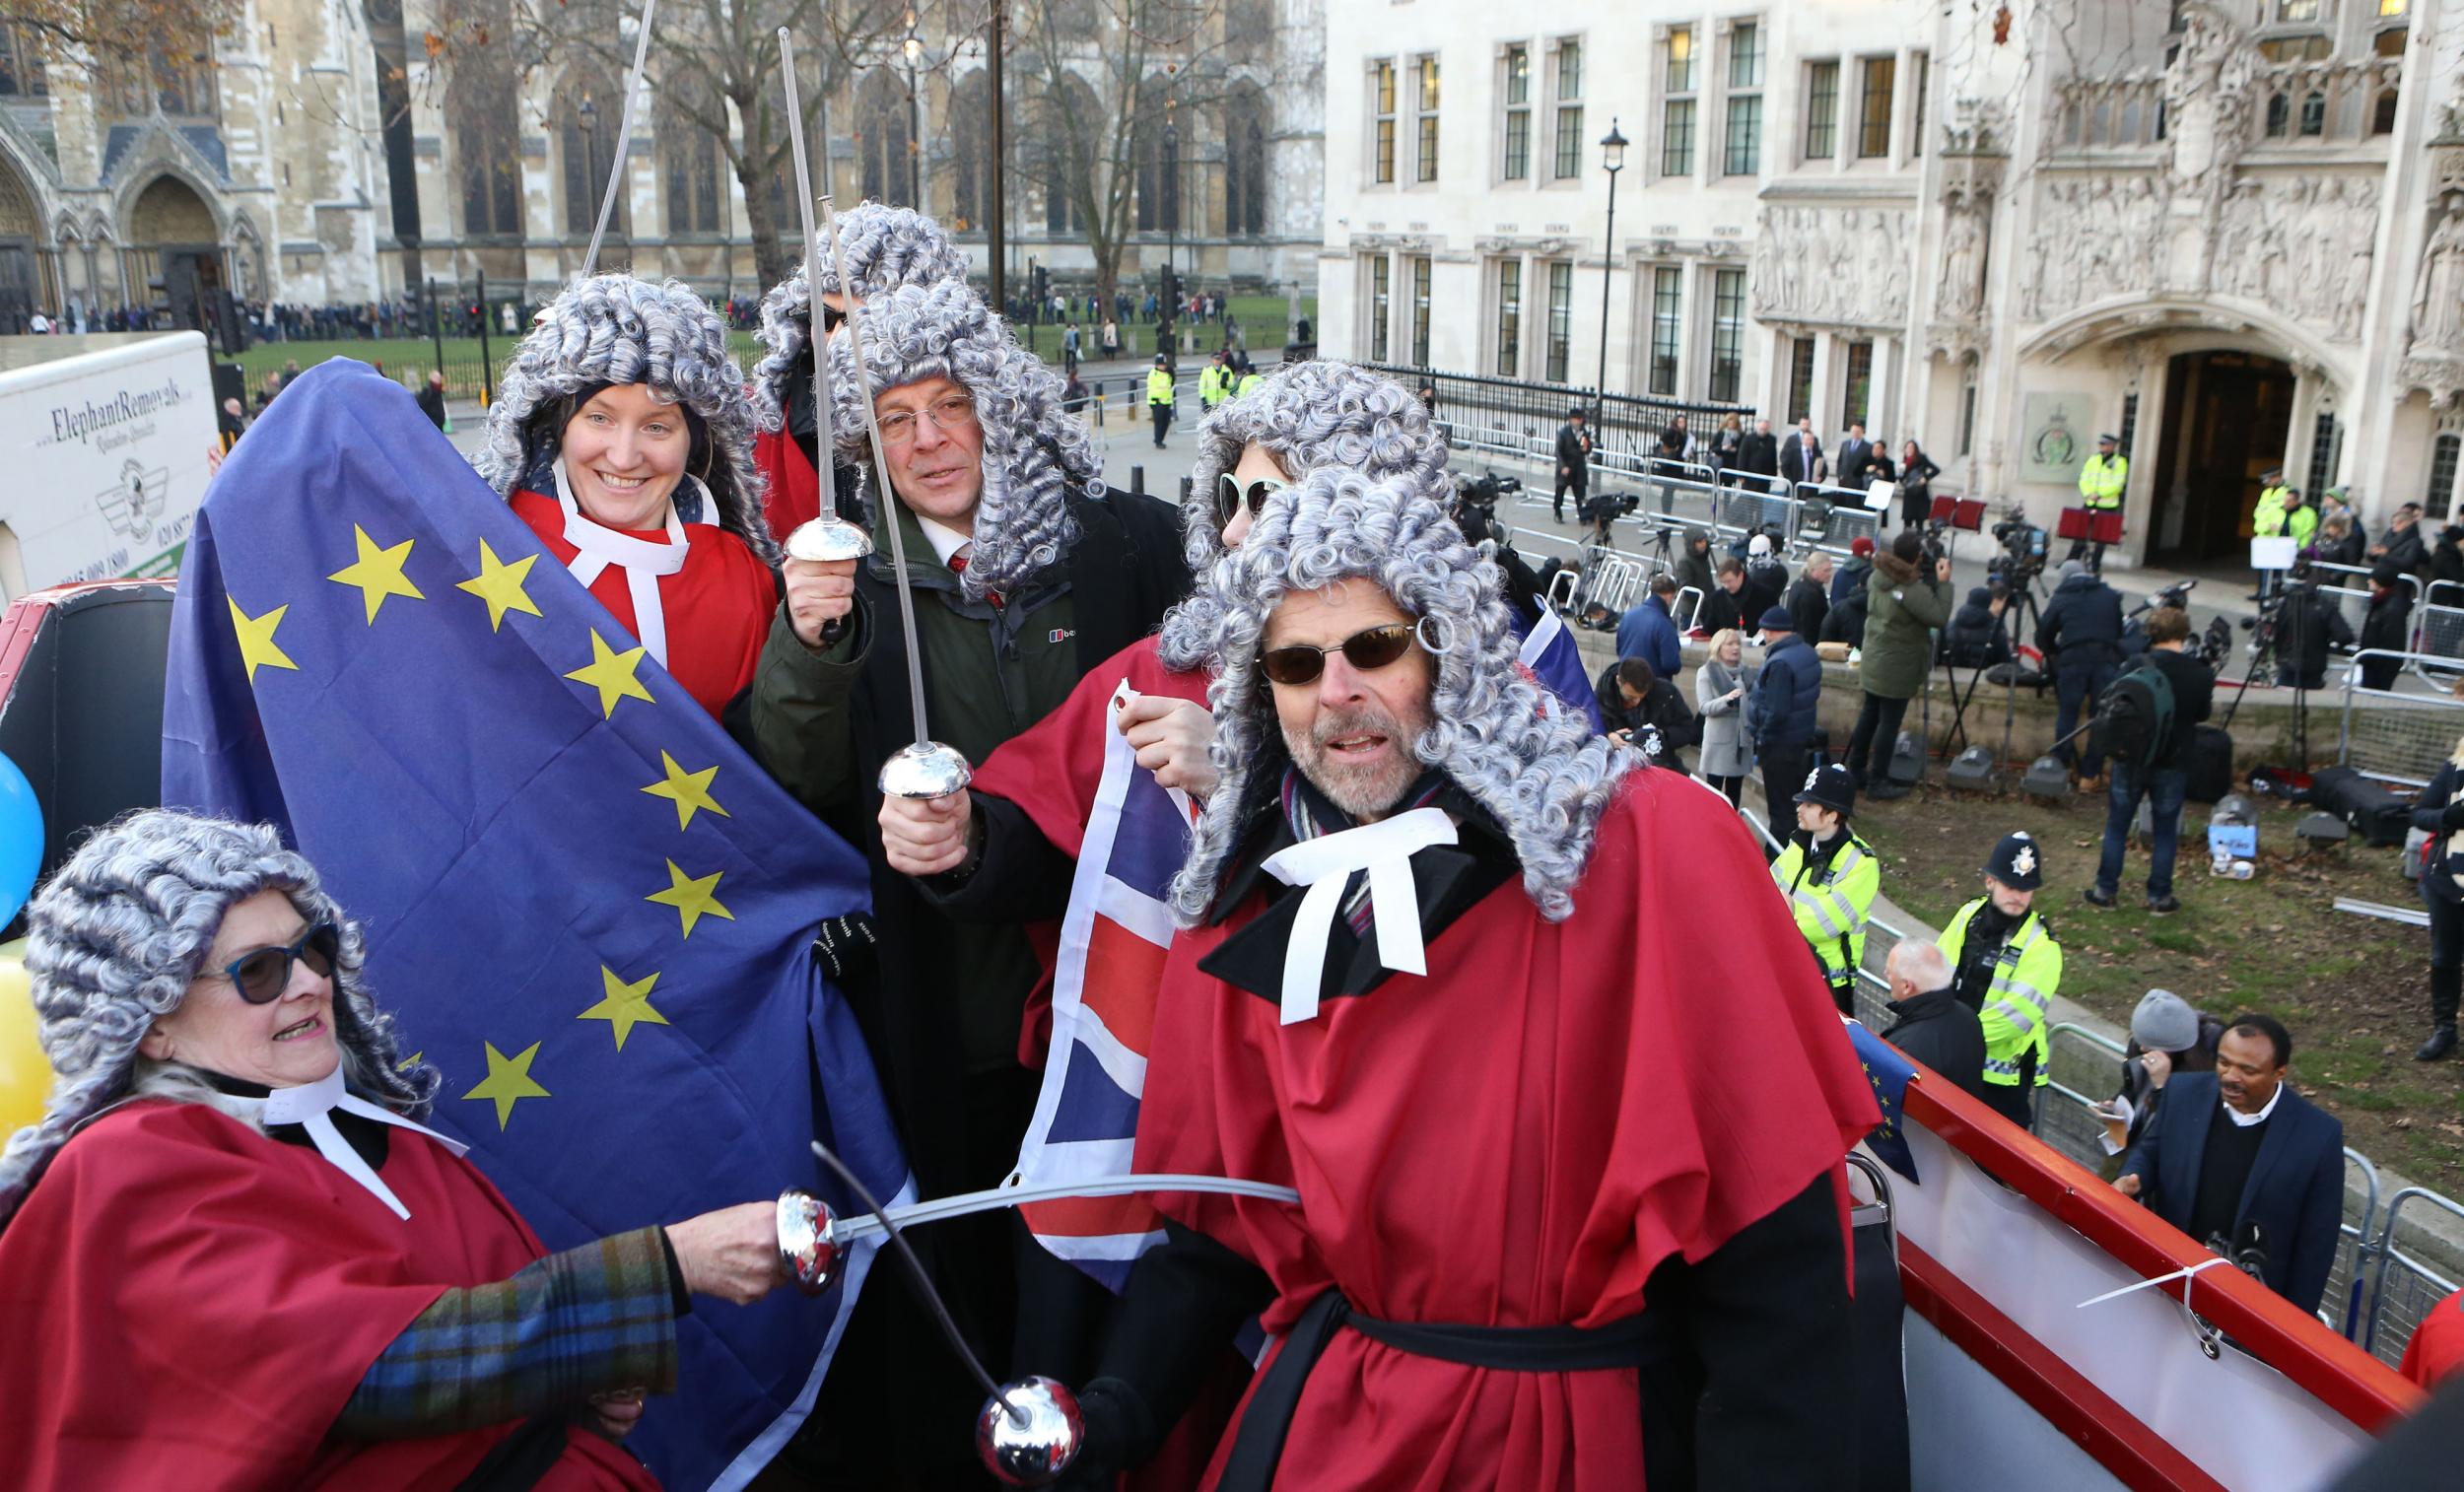 Protesters outside the Supreme Court show their support for a parliamentary vote. A decision on the Article 50 case is expected on Tuesday